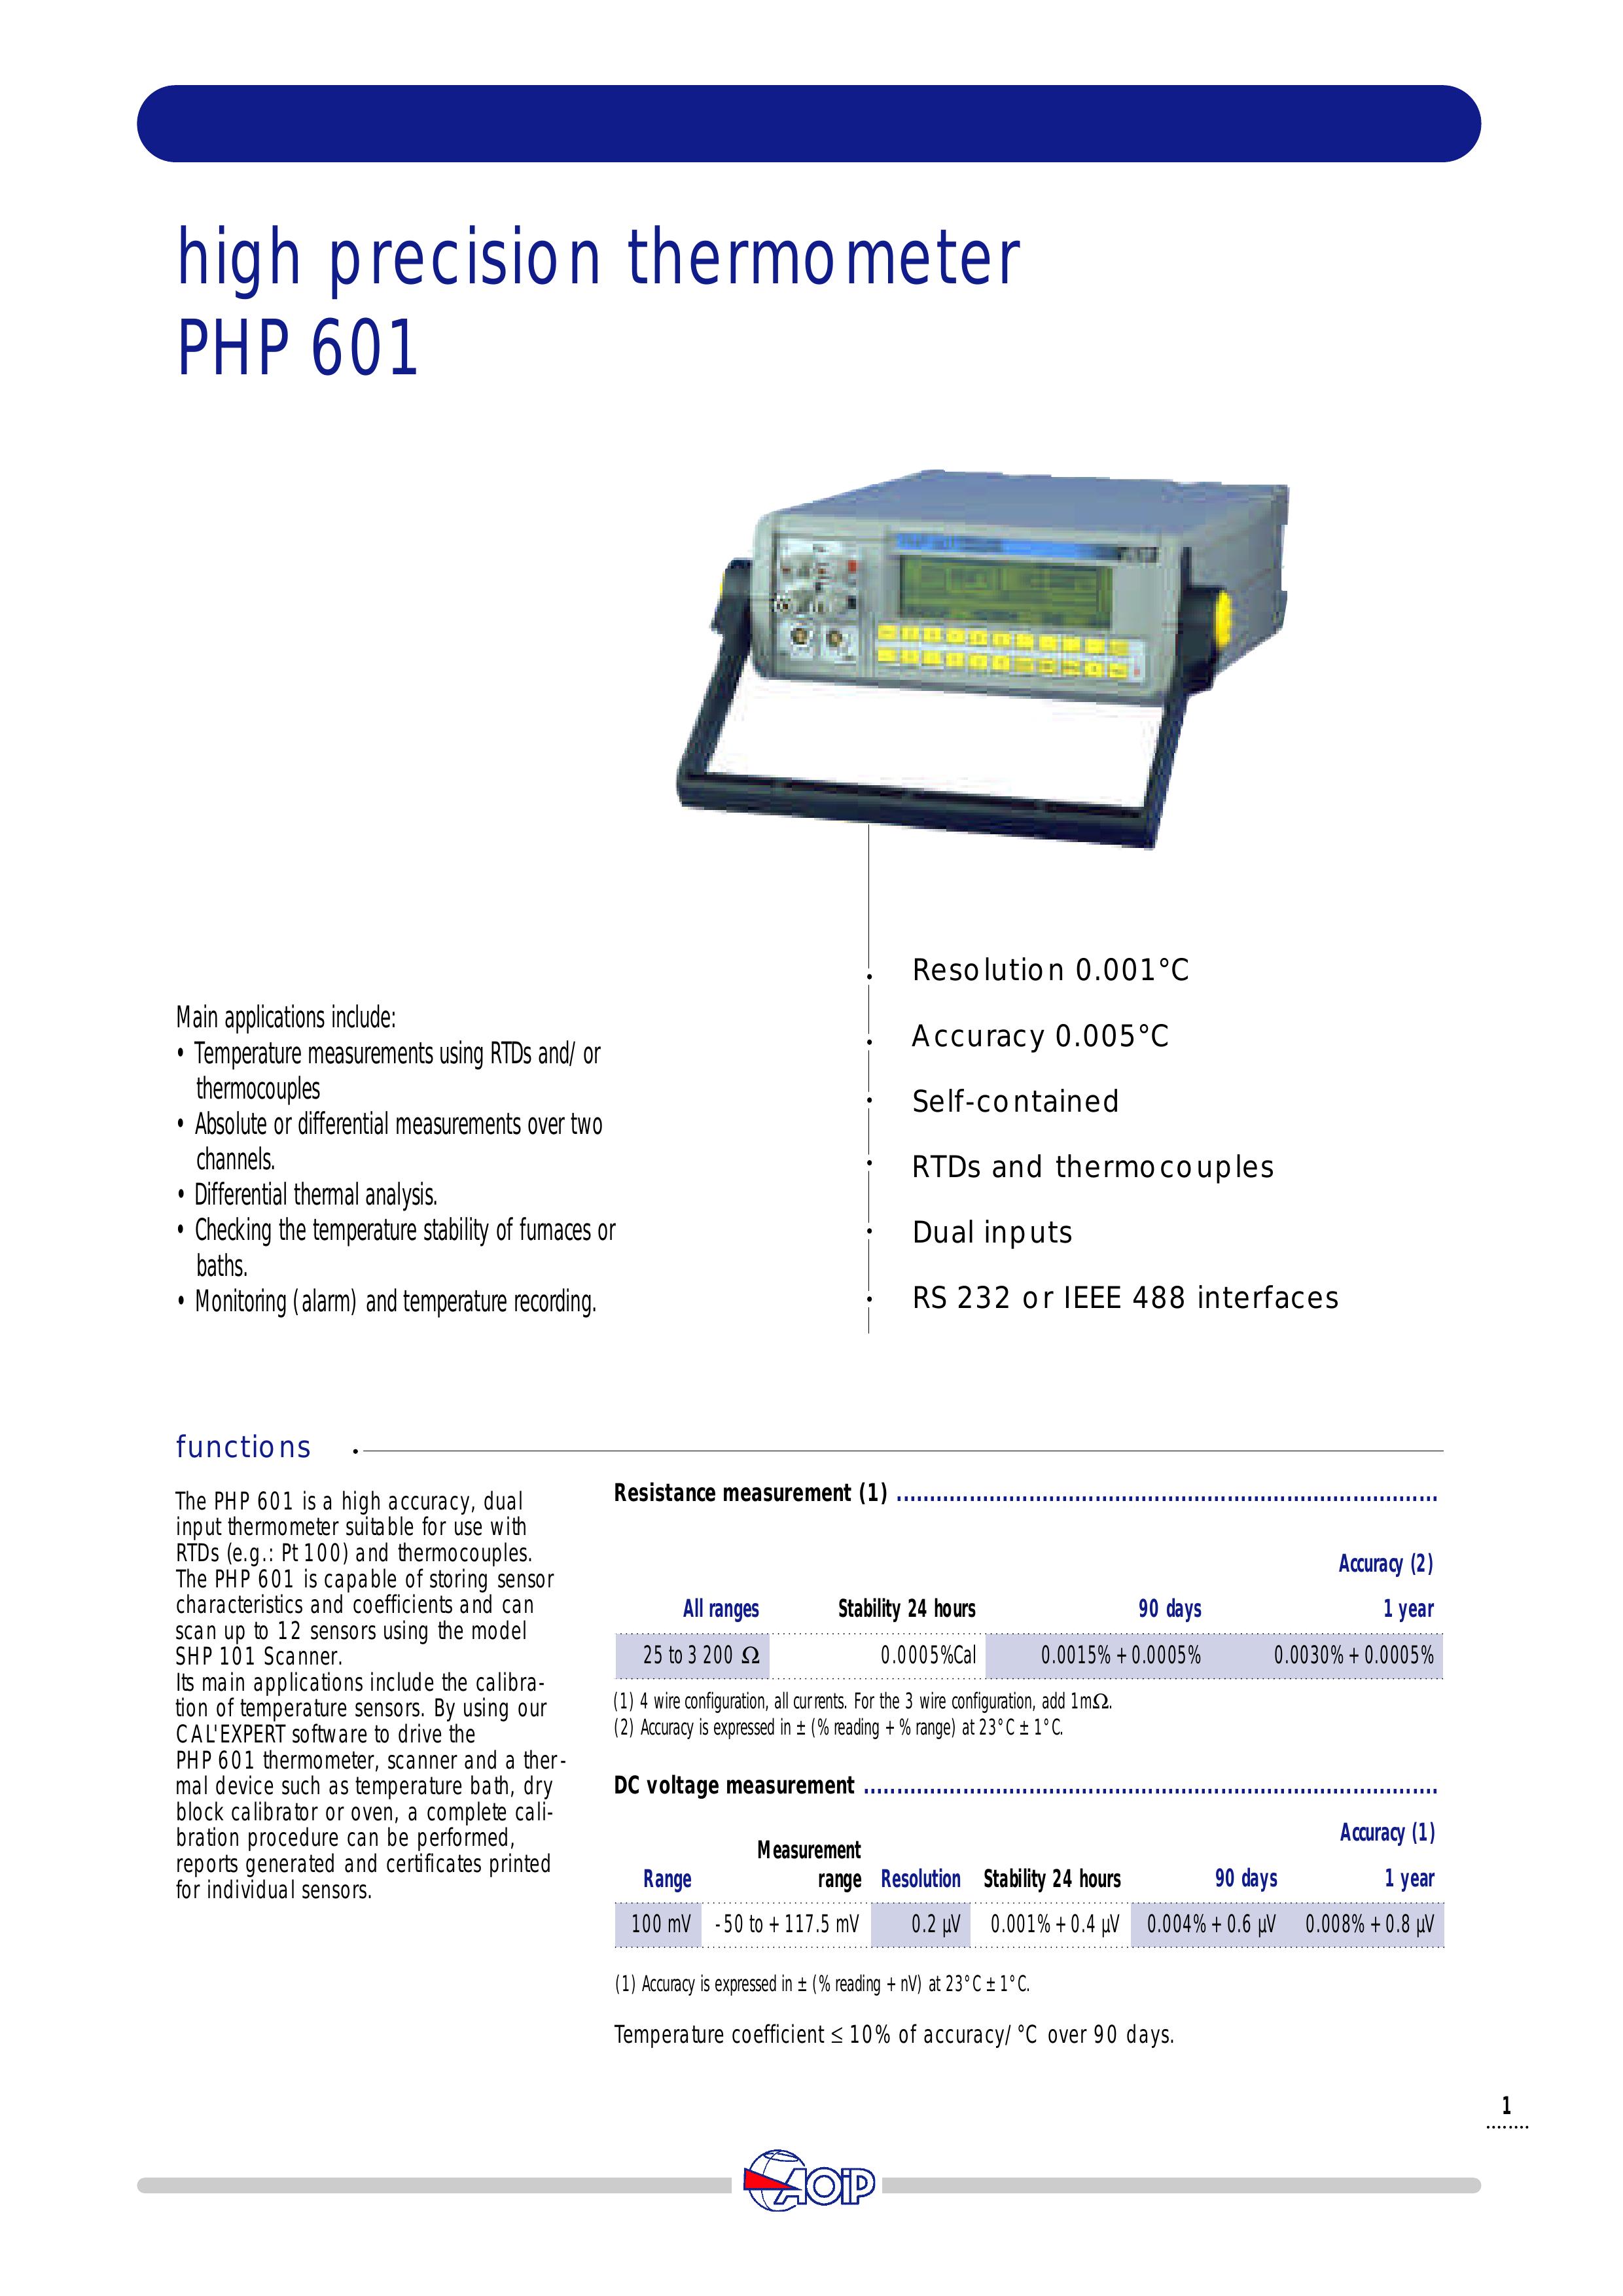 Thermo-Serv PHP601 Weather Radio User Manual